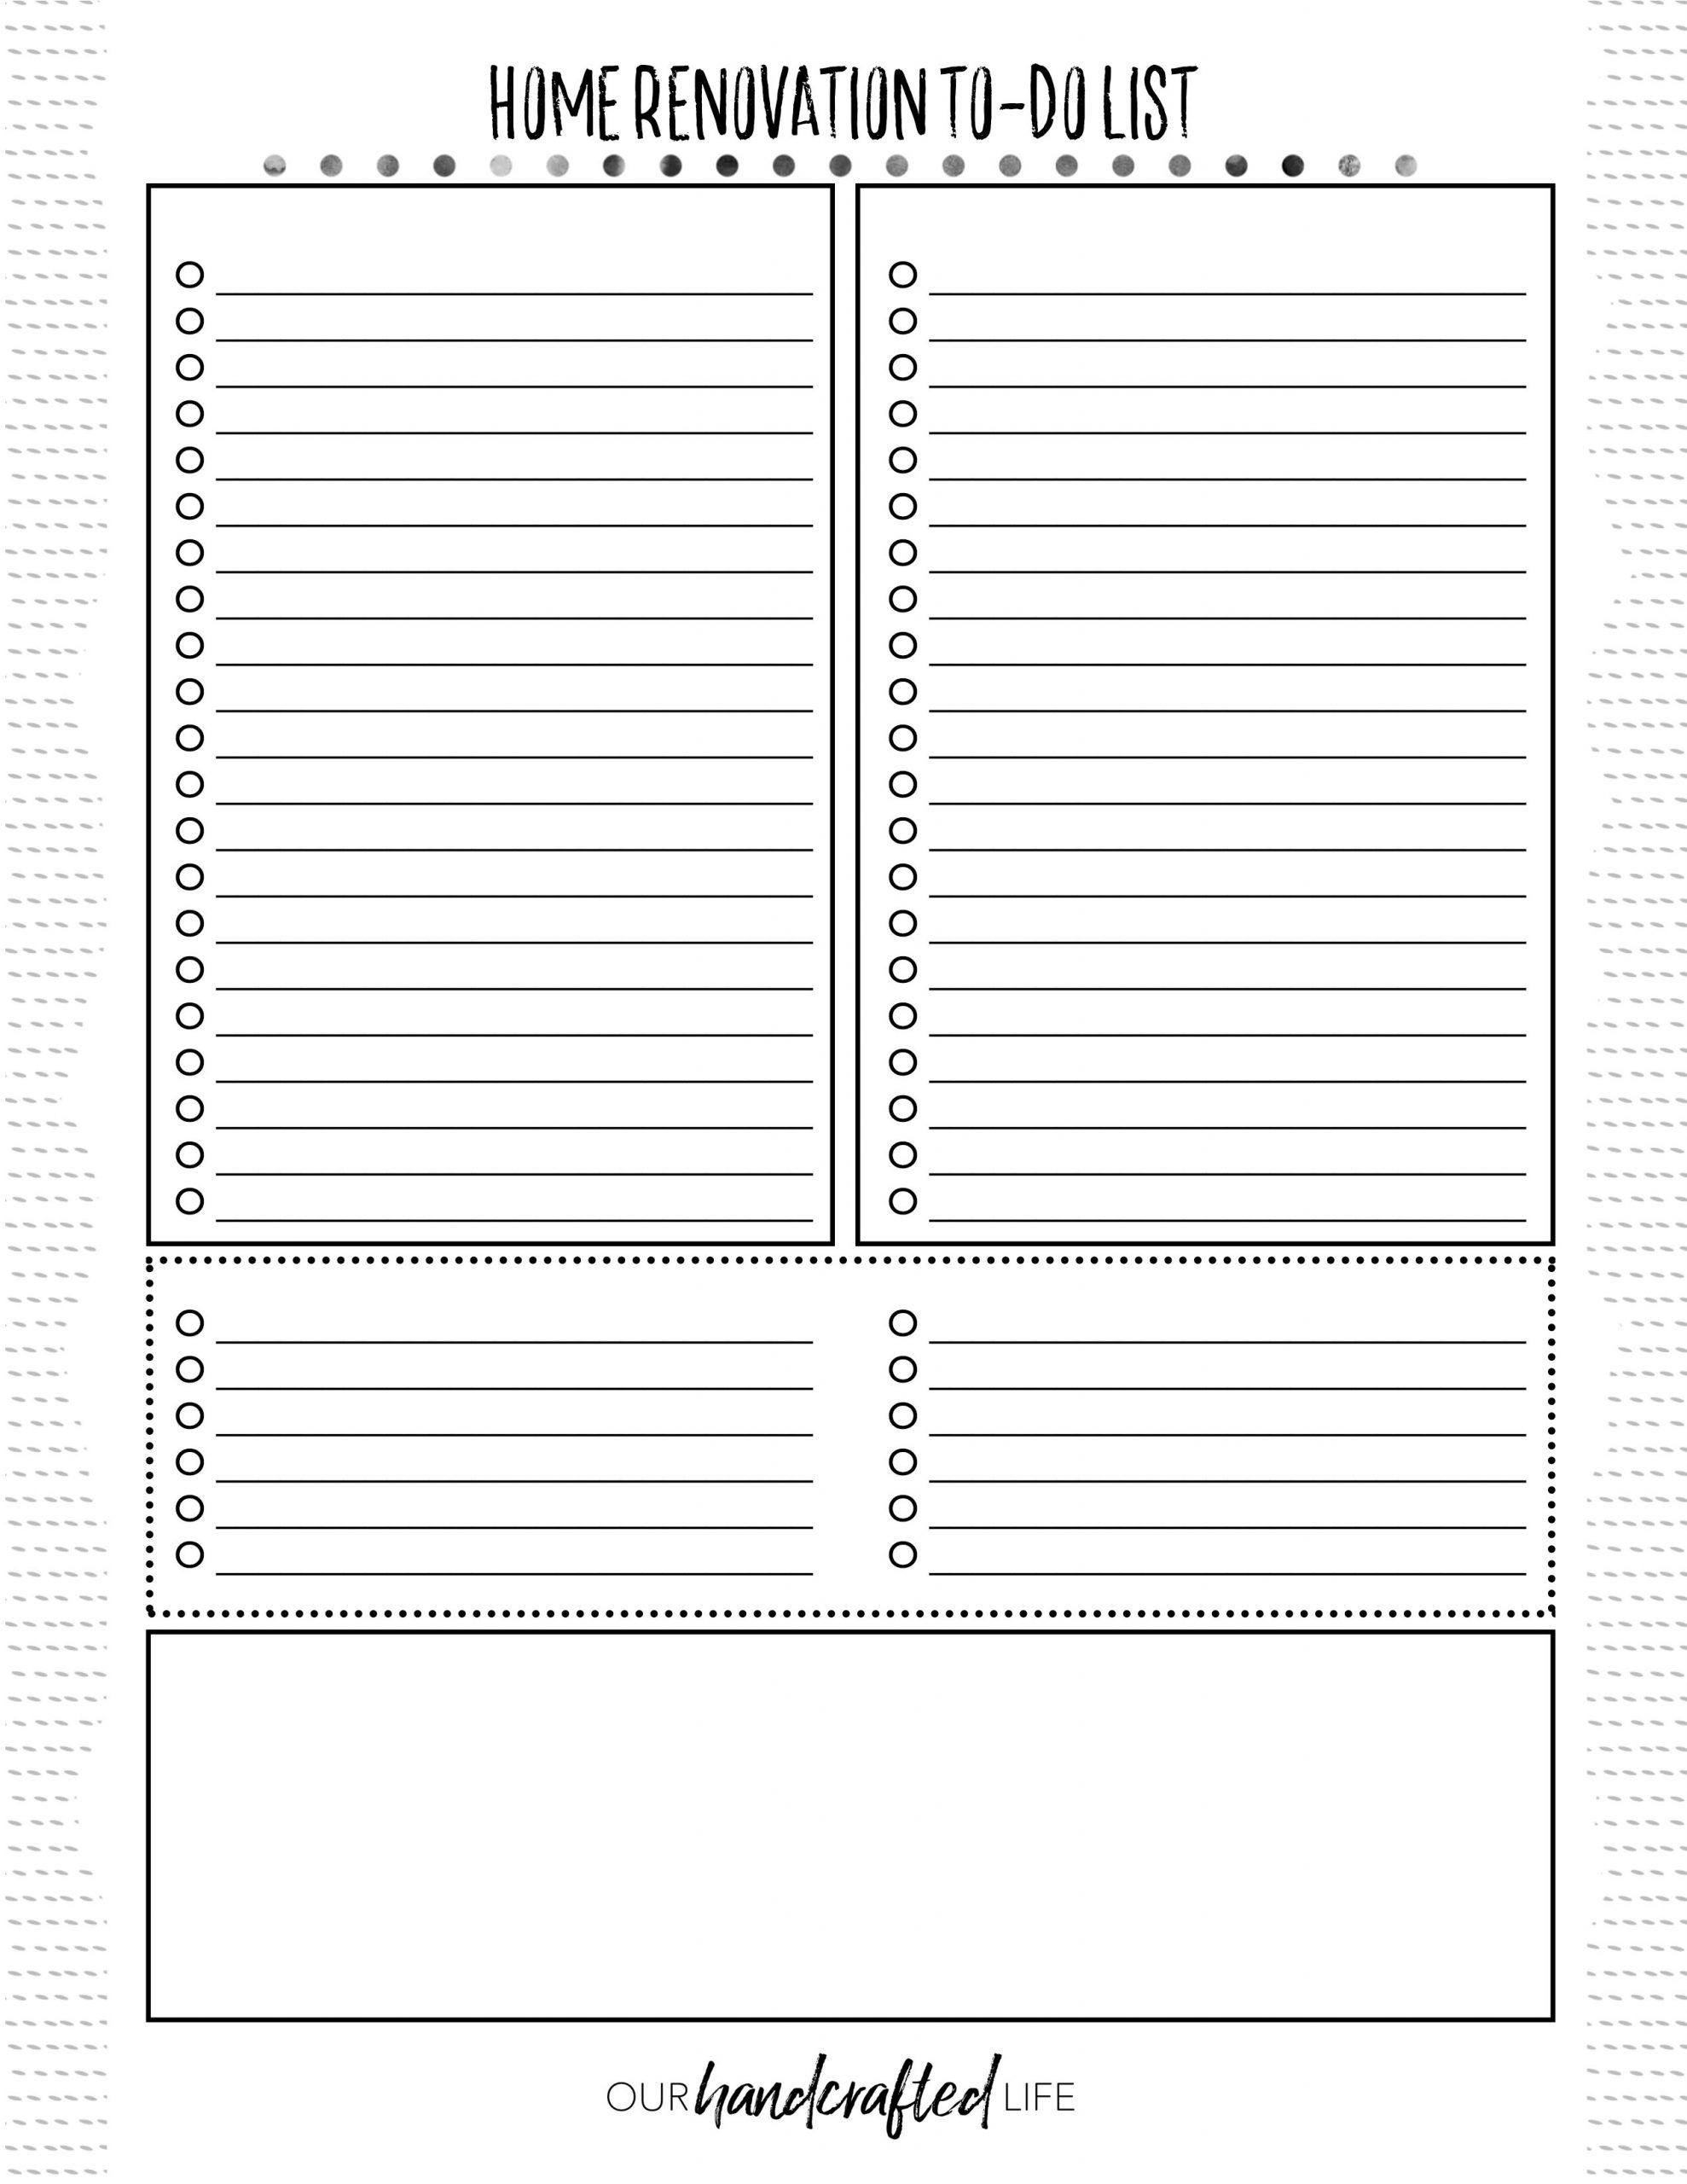 home-renovation-planner-free-printable-diy-home-reno-project-planner-our-handcrafted-life